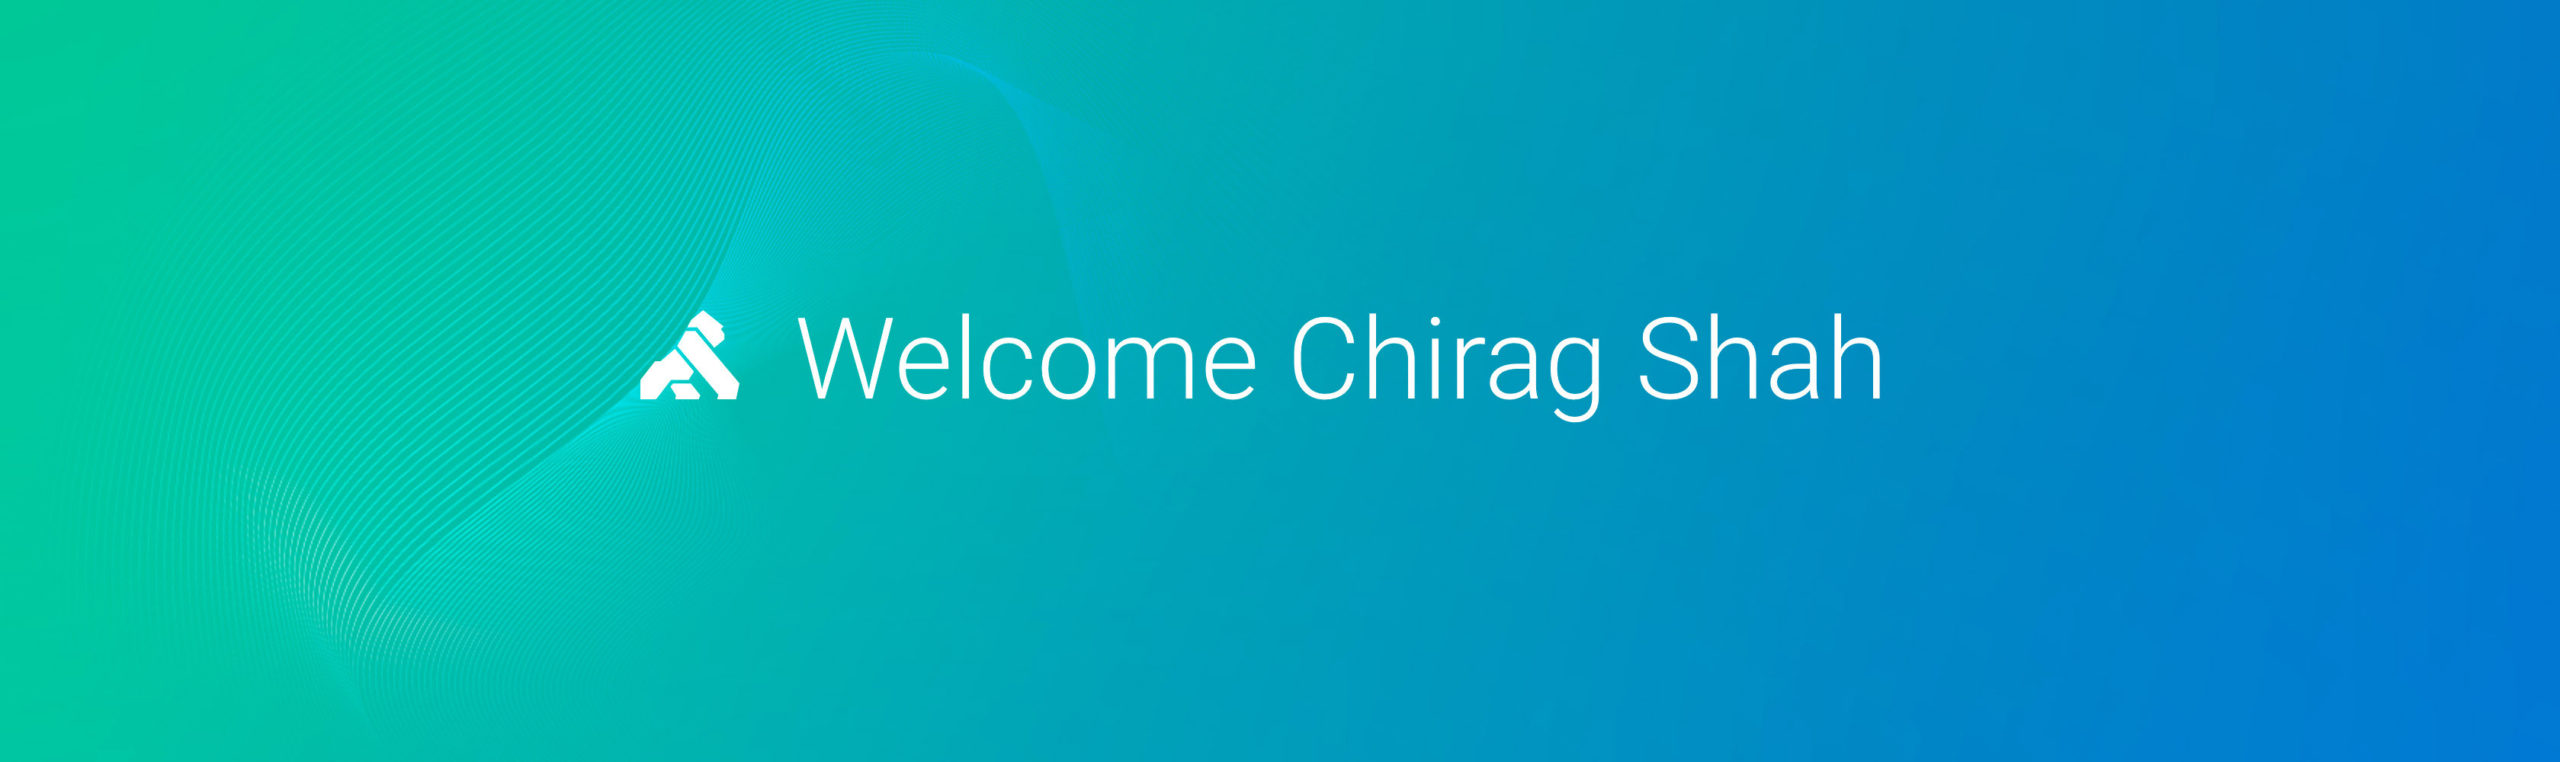 Welcome Chirag Shah